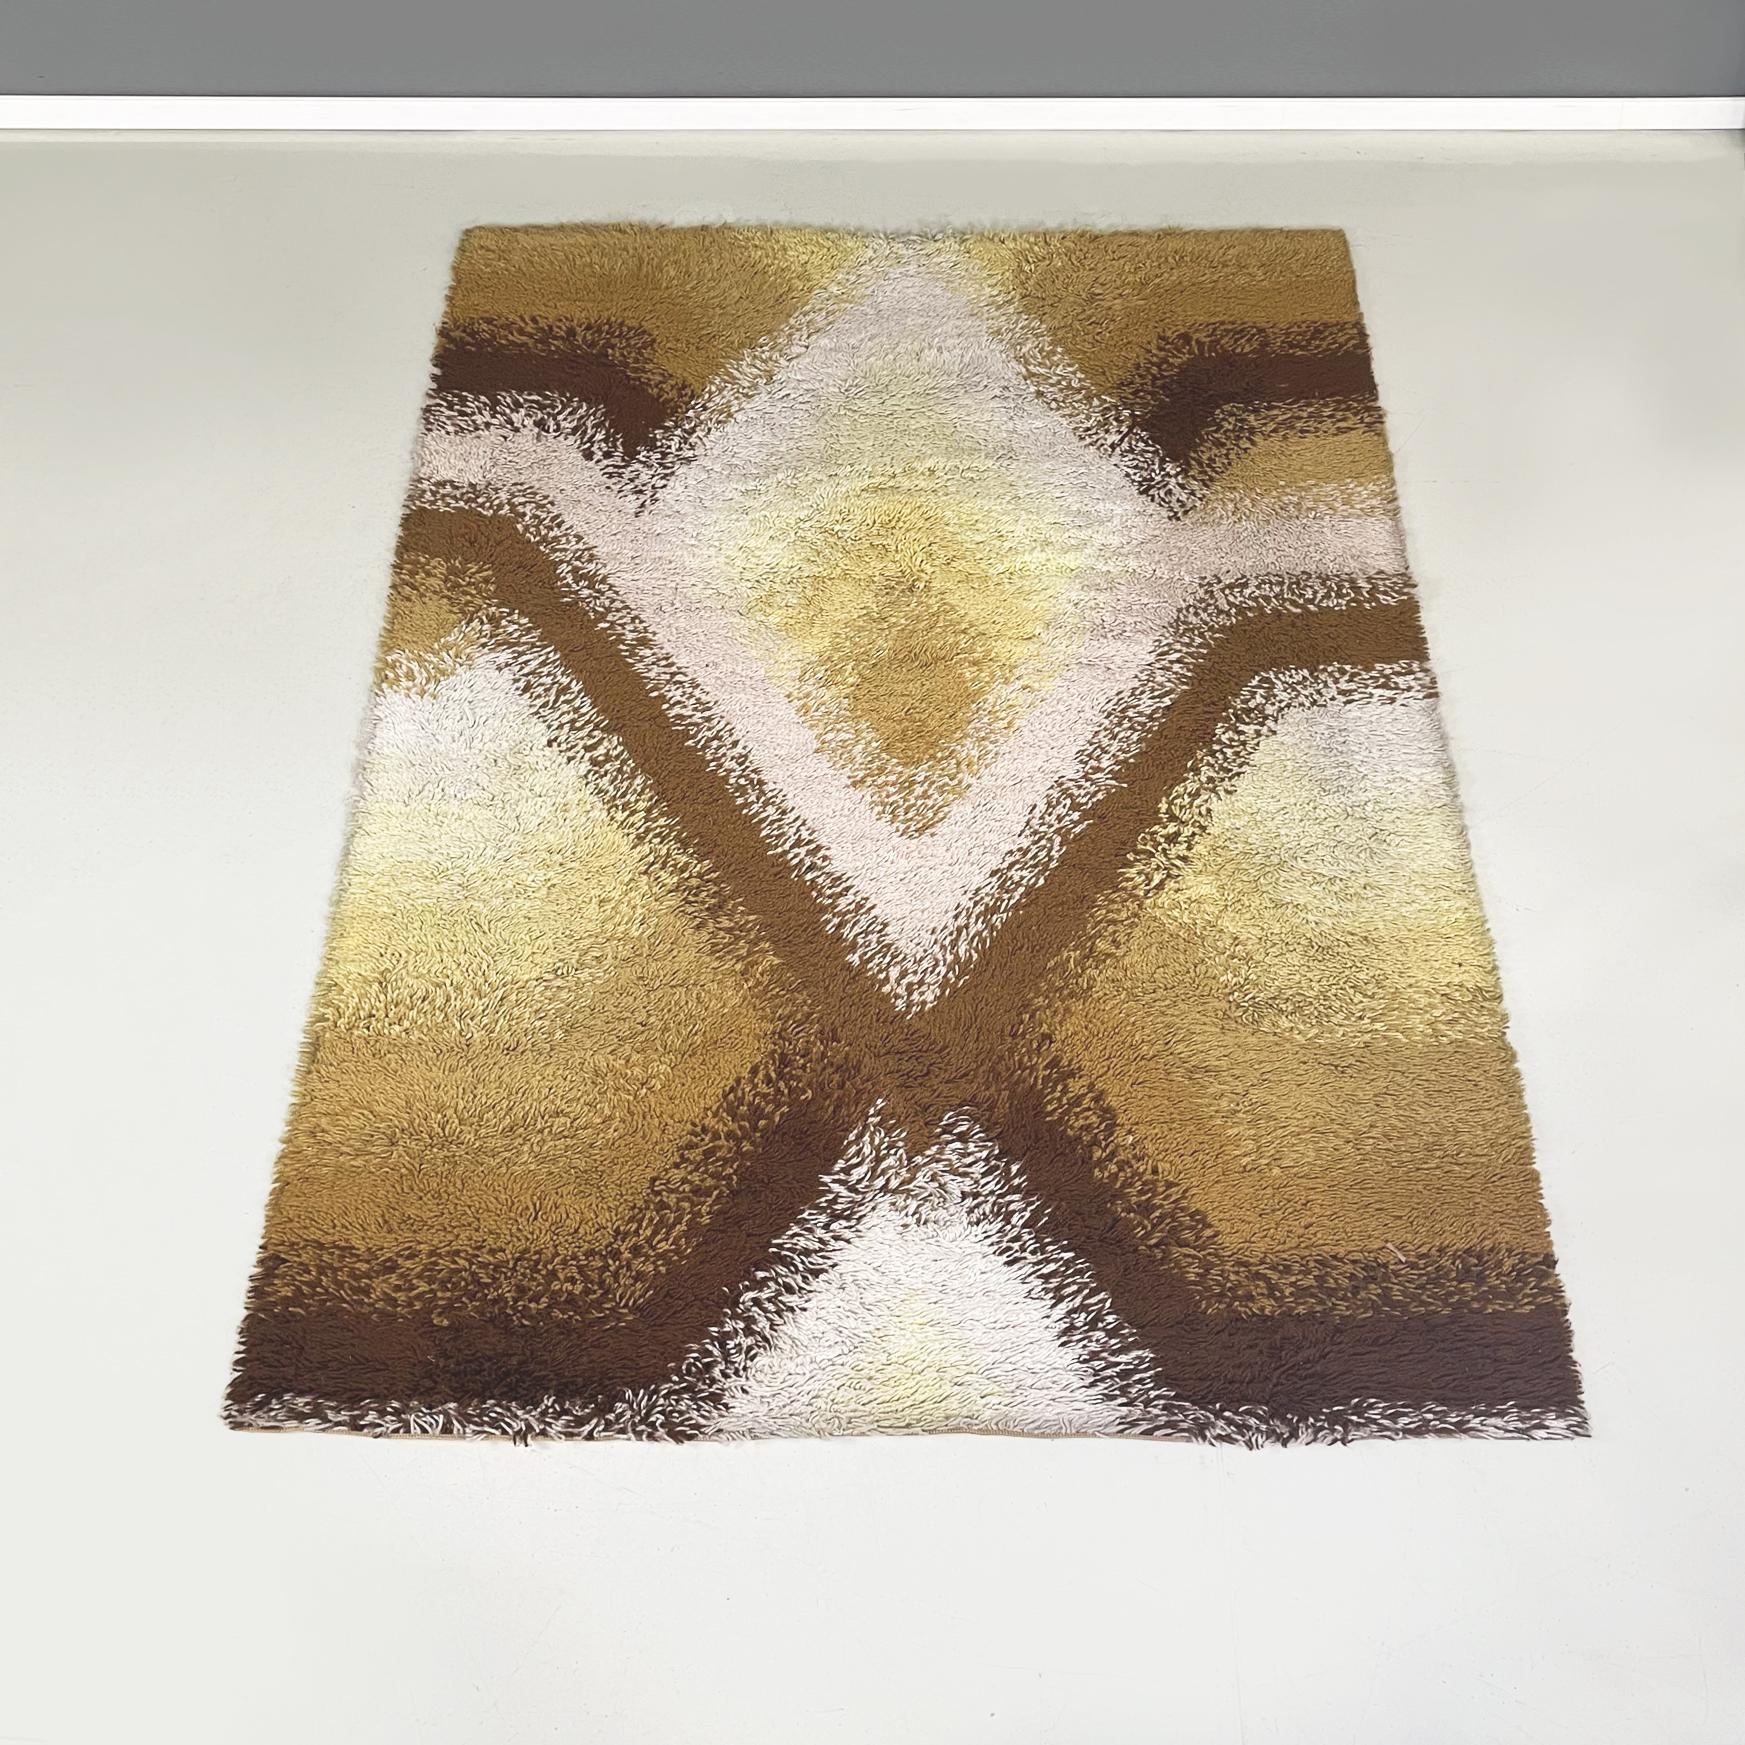 Italian space age White, yellow and brown long pile carpet, 1970s
Rectangular long pile carpet in white, yellow and brown. The rug has a geometric design with shaded lines.
1970s.
Good condition, the white is slightly grayed. It has light signs of